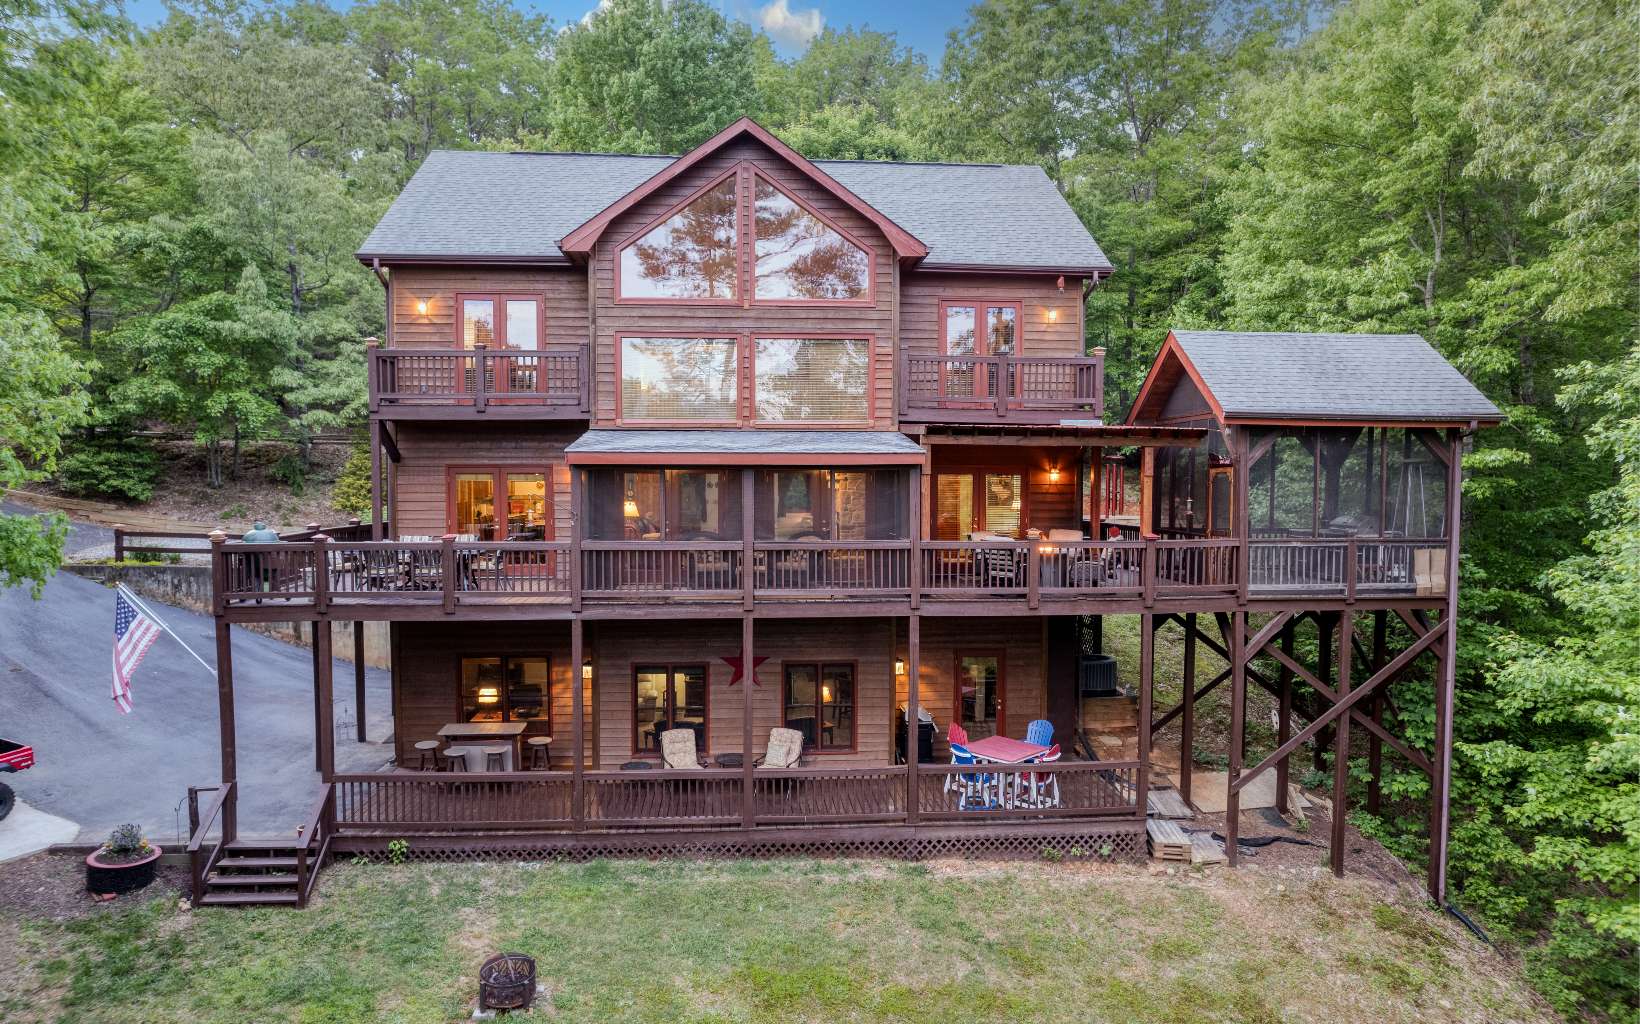 Relax in the beautiful Blue Ridge Mountains in this rustic, traditional home featuring four bedrooms and four full baths. Gorgeous views are enjoyed from soaring ceilings and oversized double pane windows in the large living room with two story stone stack fireplace. The chef’s eat-in kitchen features premium stainless- steel appliances, granite countertops, and walk-in pantry. The oversized primary bedroom suite has two walk-in closets, a private en suite with jetted tub and separate walk-in shower. Enjoy mountain views from a private balcony off the primary suite. The additional bedrooms are well portioned and have private balconies. Convenient main level laundry room. Entertaining is easy in the fully finished, walk out basement. A screened in porch and double decks provide plenty of space to enjoy the natural setting. Roast marshmallows and tell tall tales by the fire pit in the backyard. Grill and Big Green Egg for year-round grilling. Located in a quiet neighborhood with two driveways for easy access. Conveniently close to downtown Blue Ridge. YOU MUST SEE THIS HOME! There are too many upgrades to list!